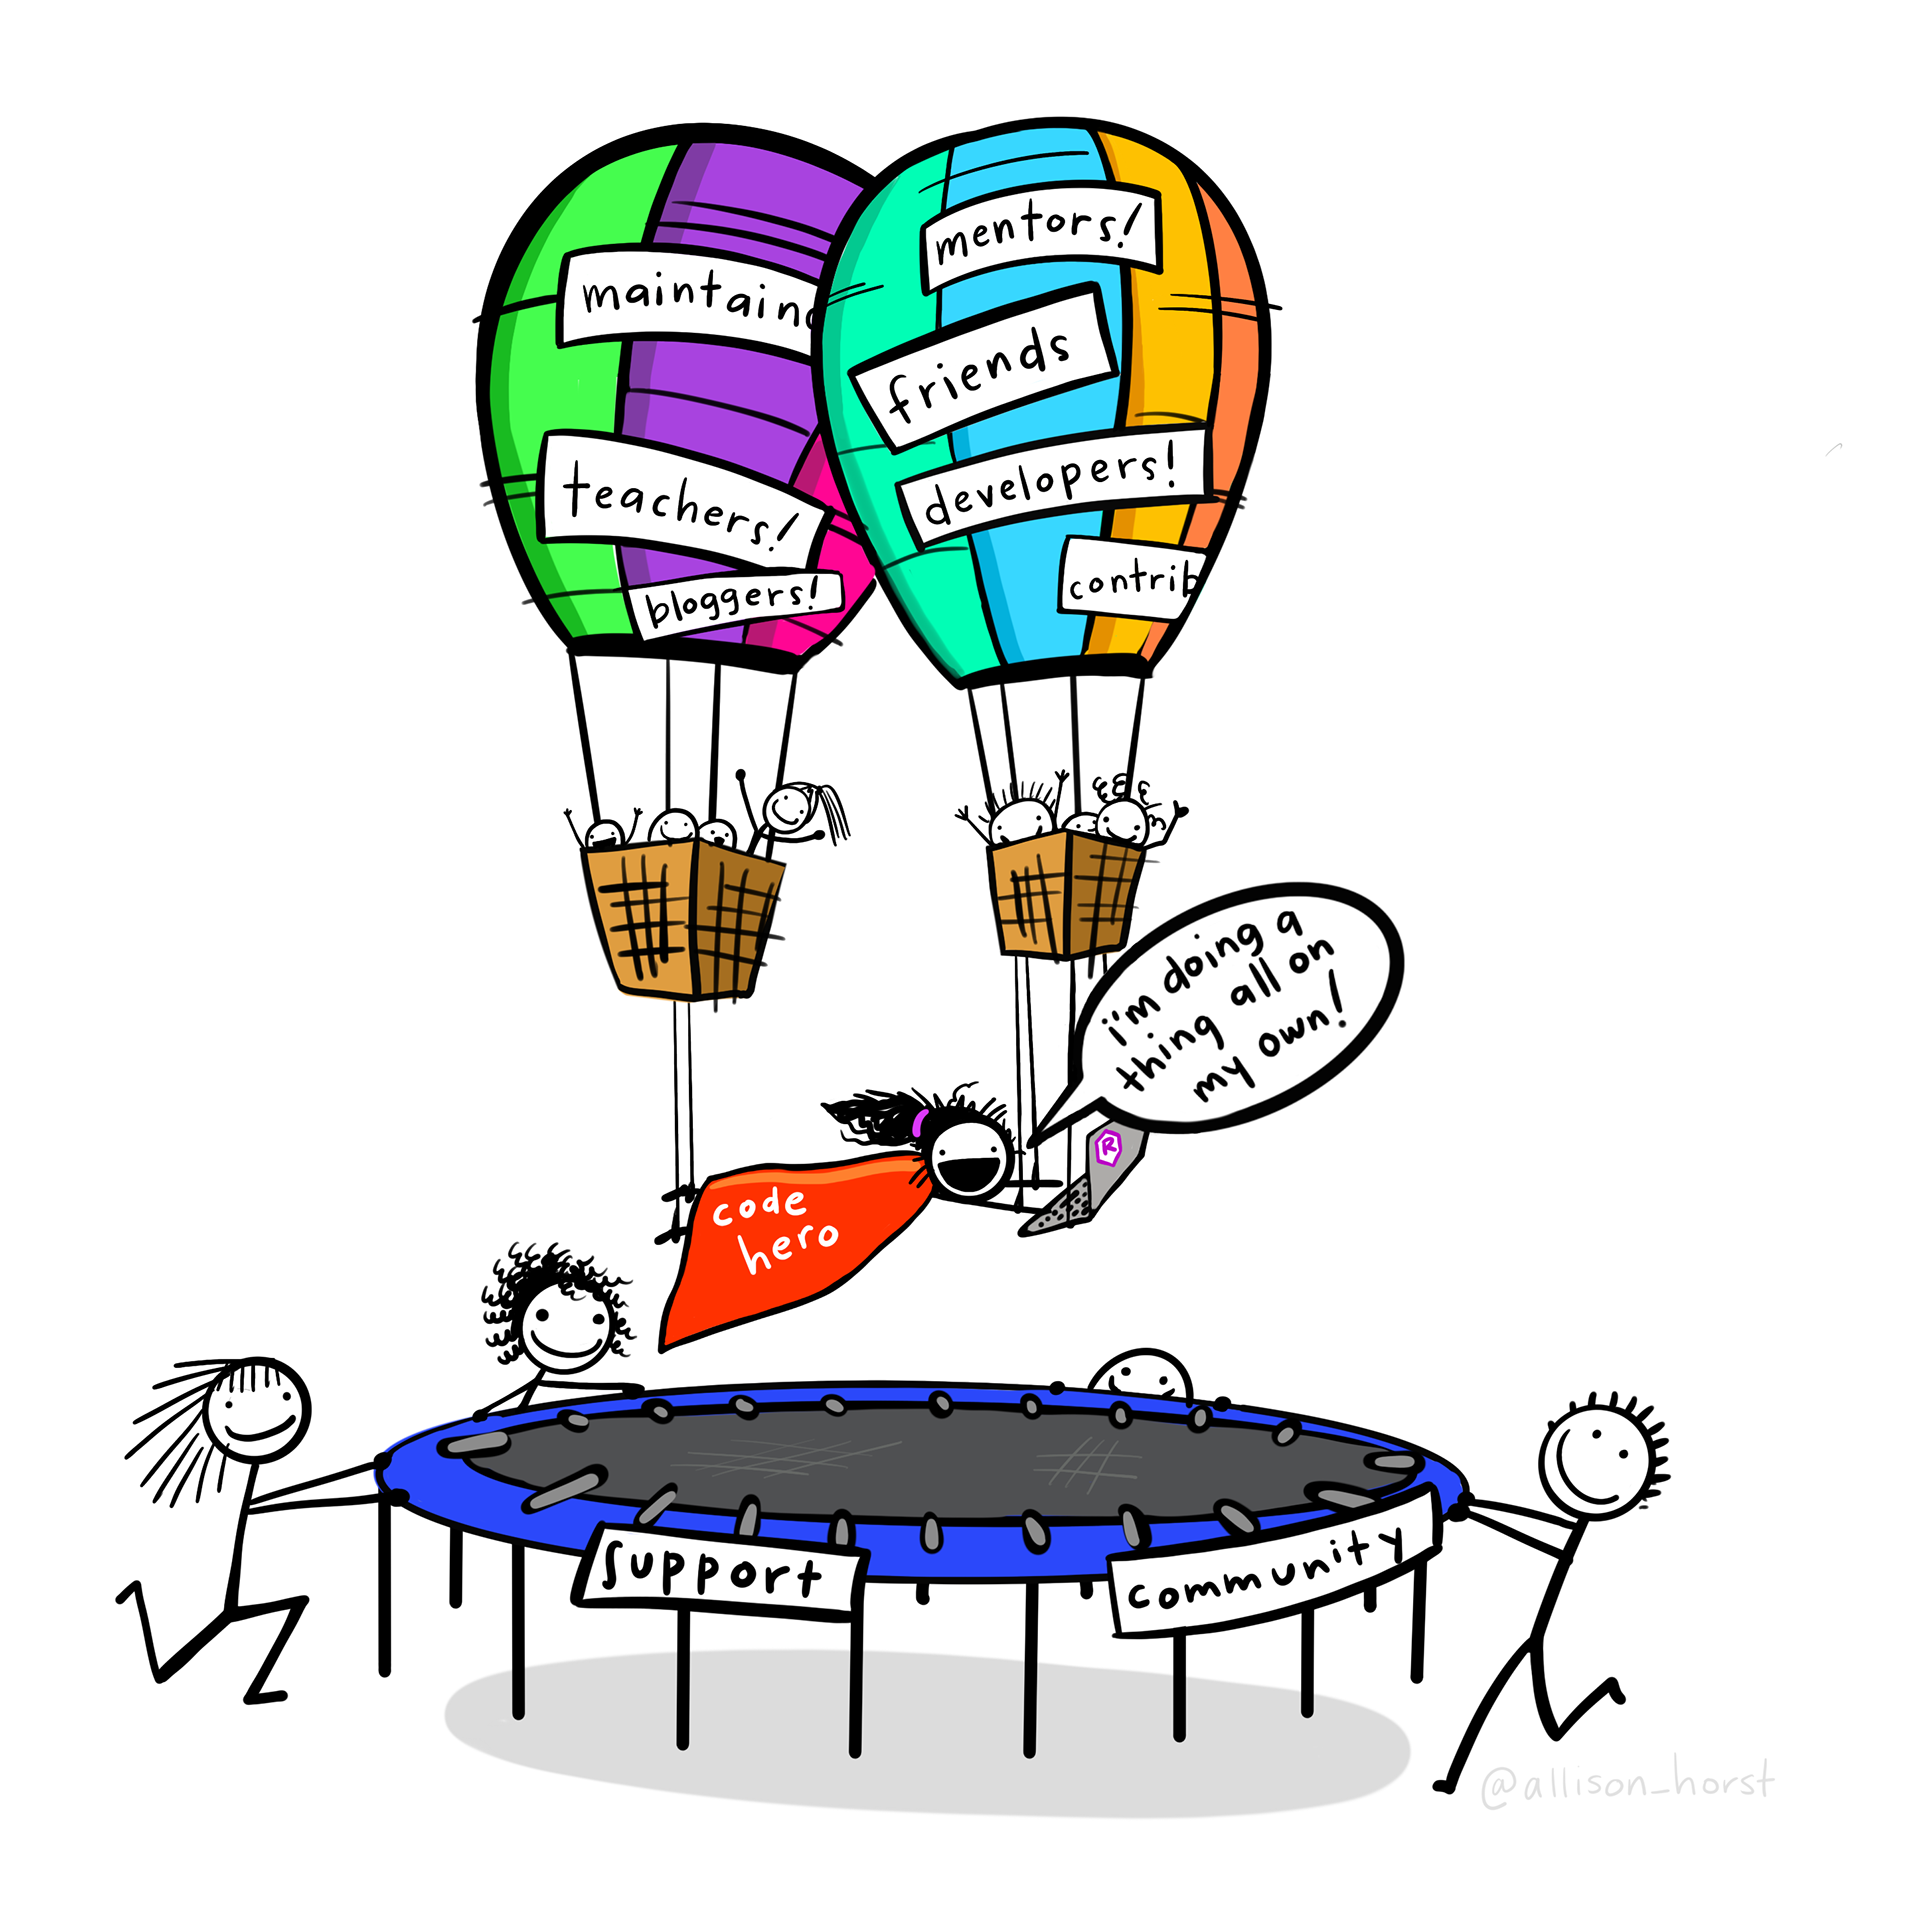 A person in a cape that reads 'code hero' who looks like they are flying through the air while typing on a computer while saying 'I’m doing a think all on my own!' The coder’s arms and legs have ropes attached to two hot air balloons lifting them up, with labels on the balloons including 'teachers', 'bloggers', 'friends', 'developers'. Below the code hero, several people carry a trampoline with labels 'support' and “community” that will catch them if they fall.